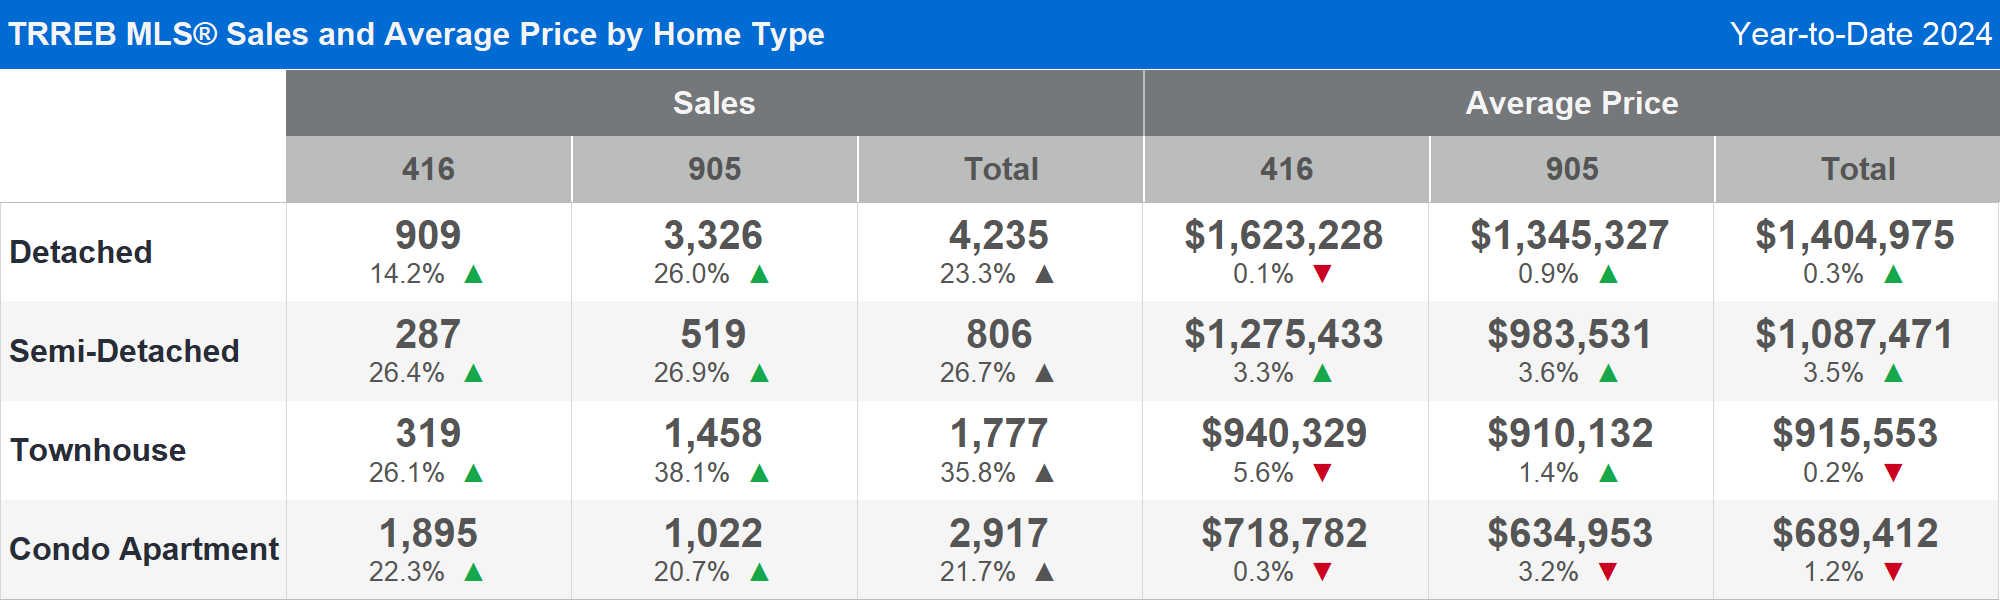 TRREB MLS® Sales and Average Price by Home Type